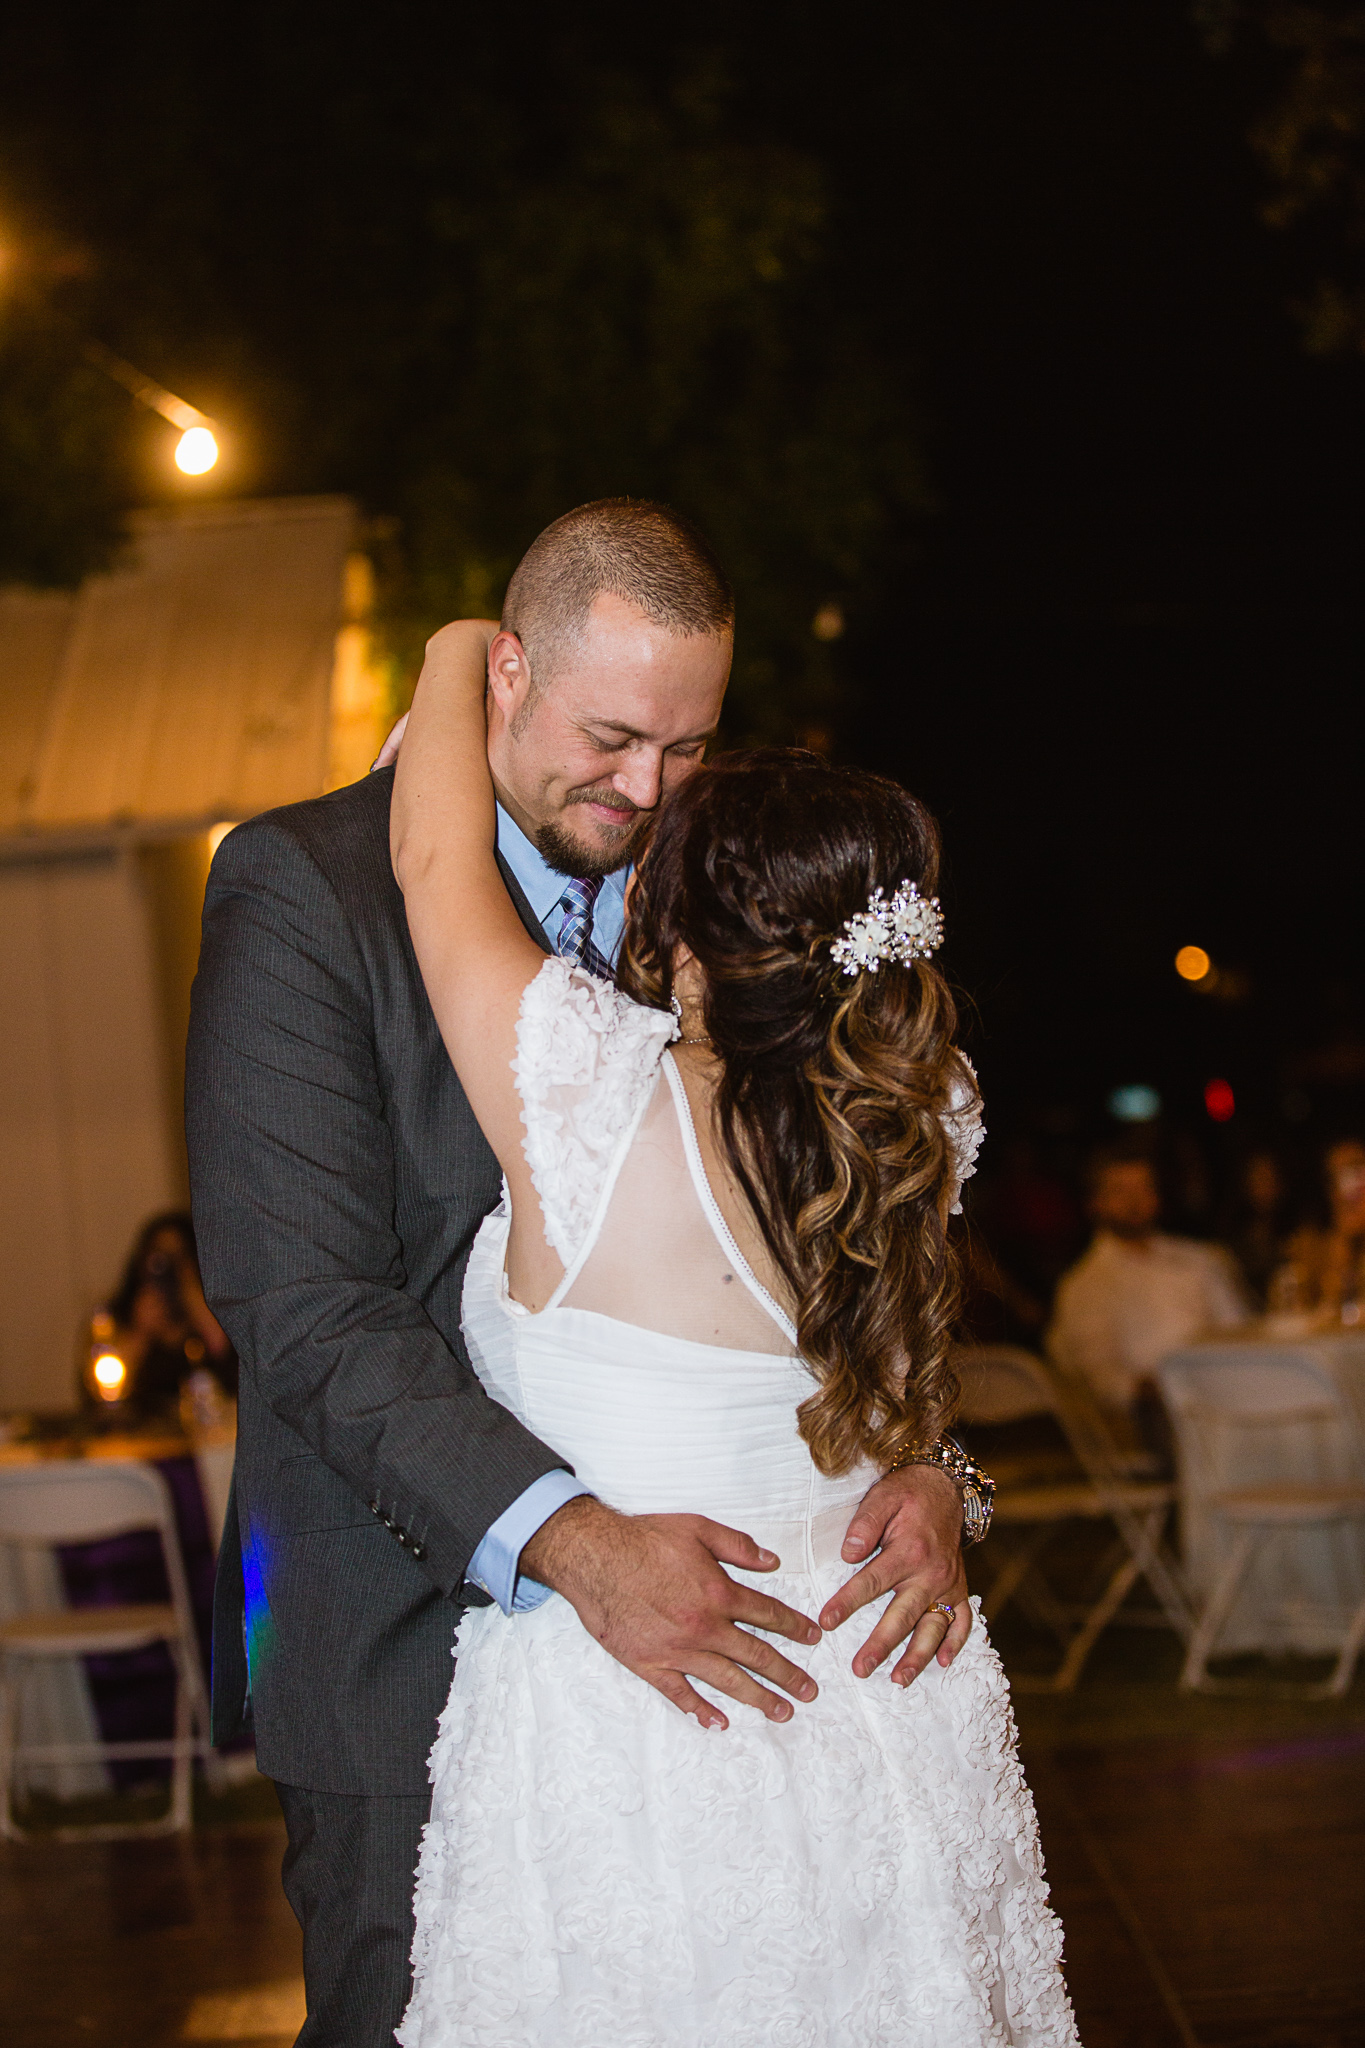 Bride and groom share their first dance during their wedding reception by PMA Photography.